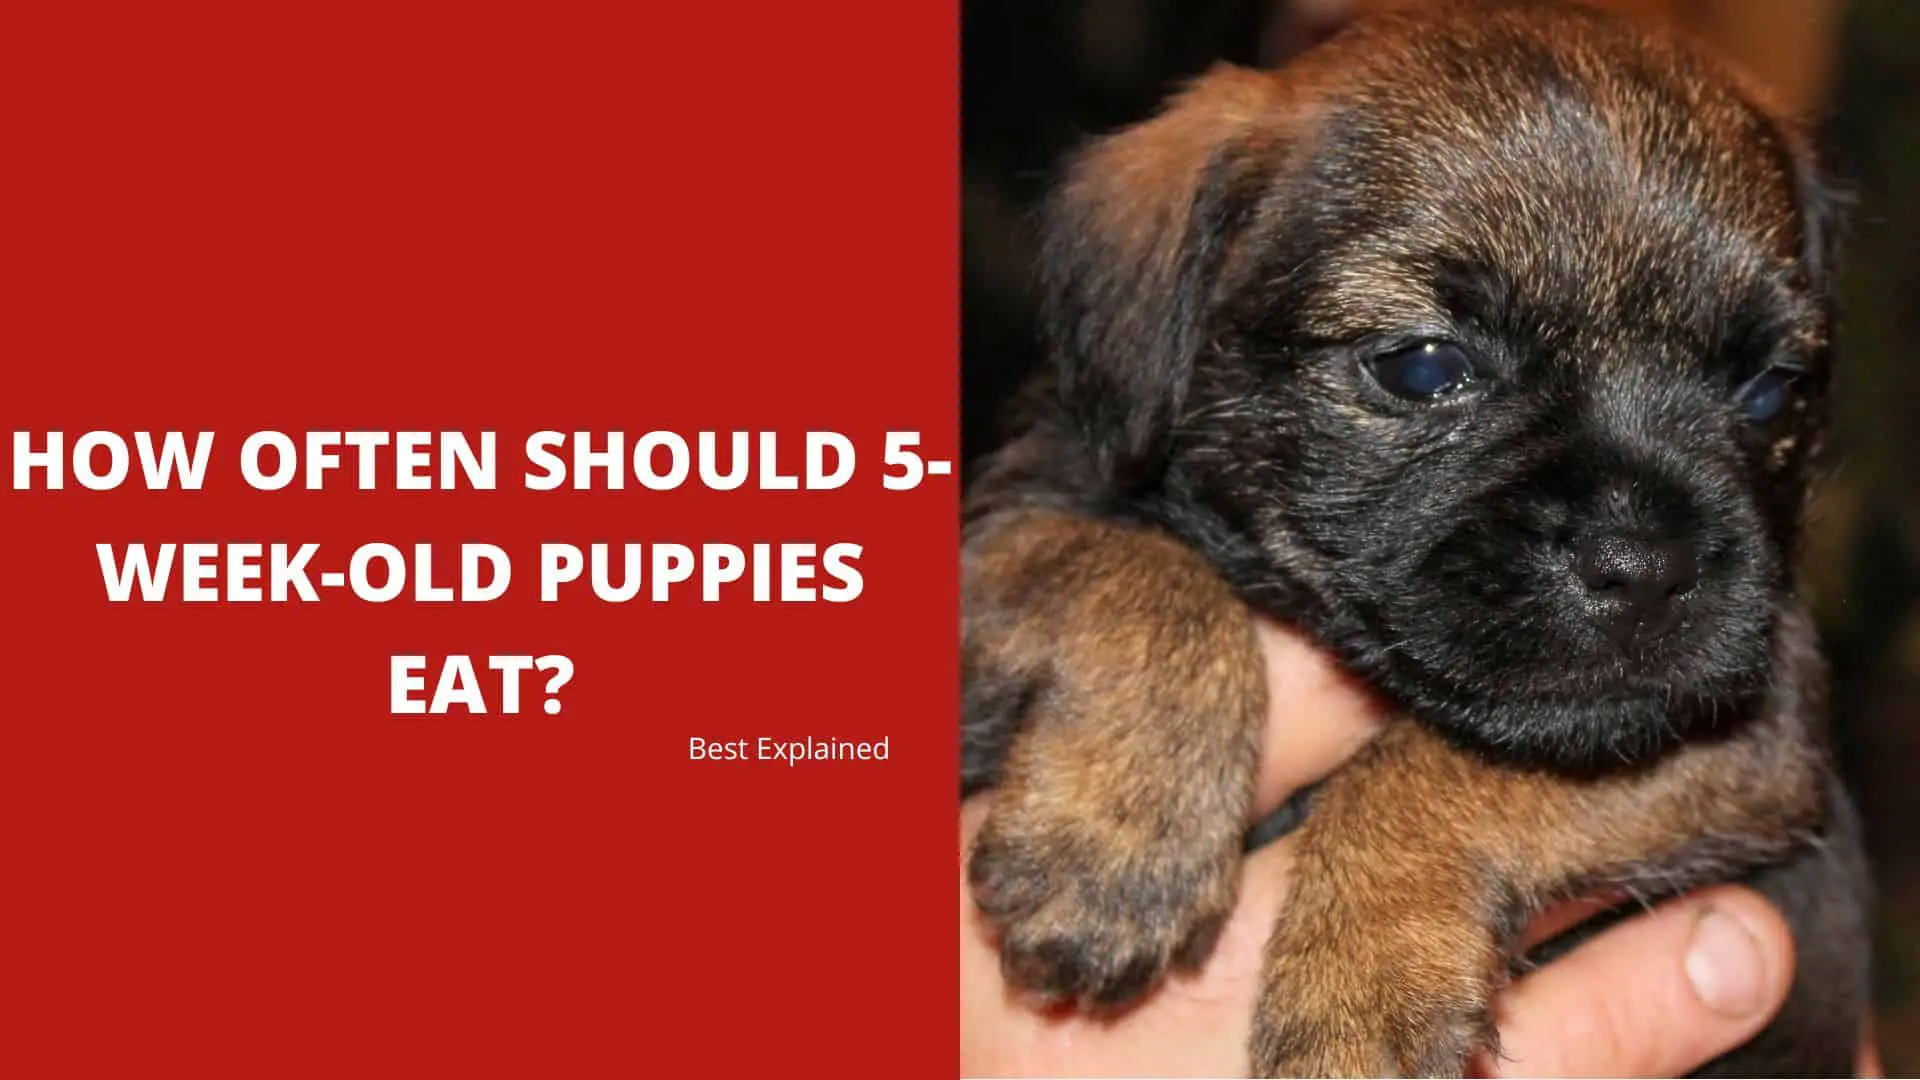 How Often Should 5-Week-Old Puppies Eat? – Best Explained